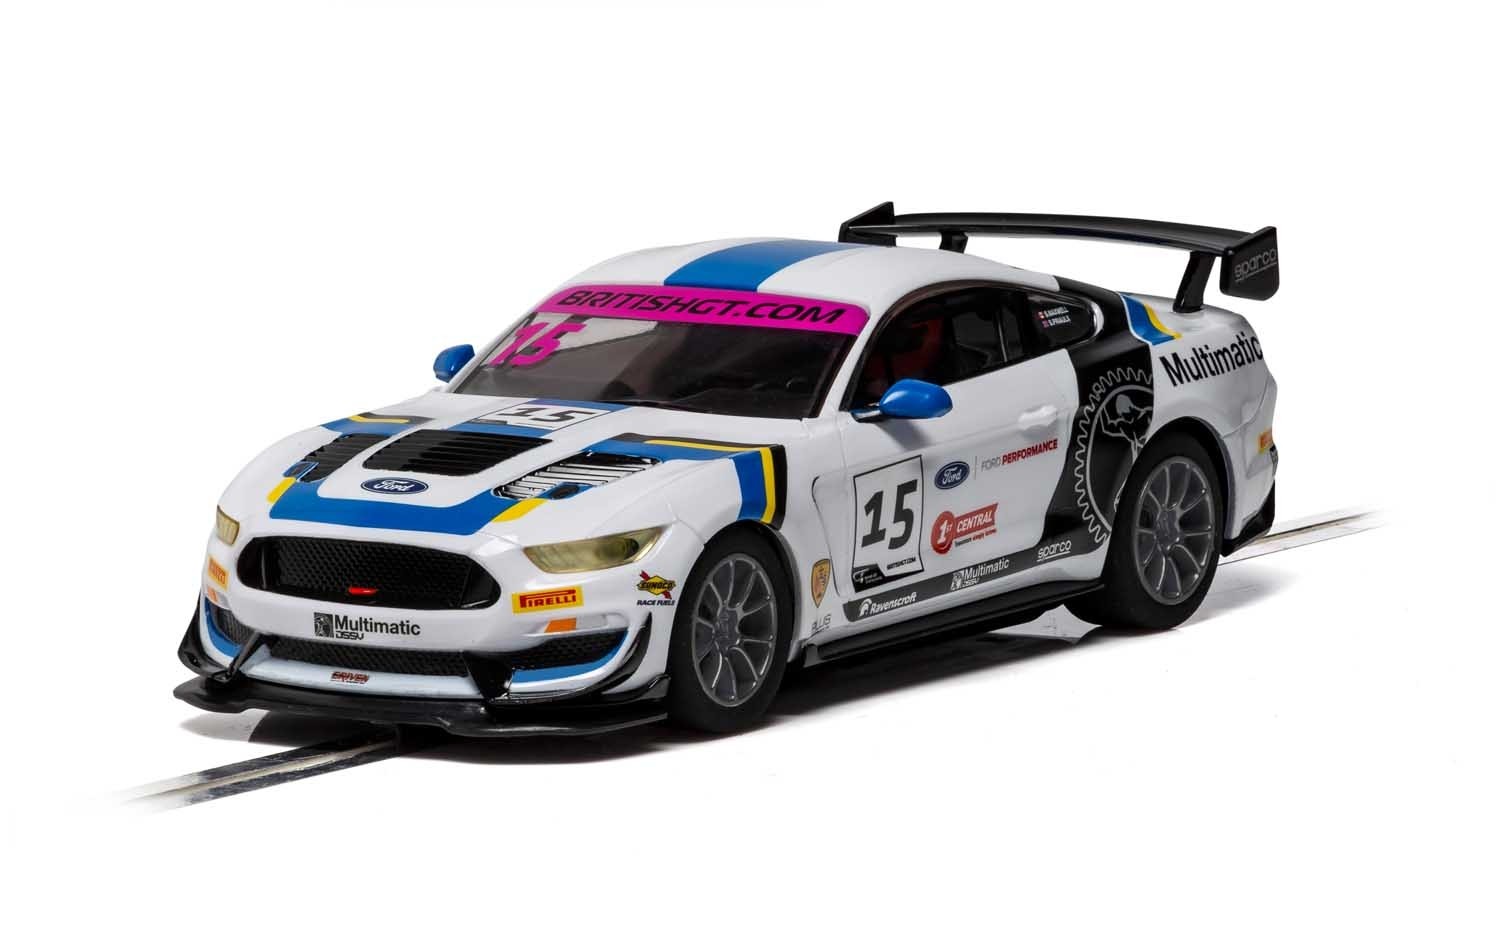 C4173 Ford Mustang GT4 "Multimatic" British GT 2019